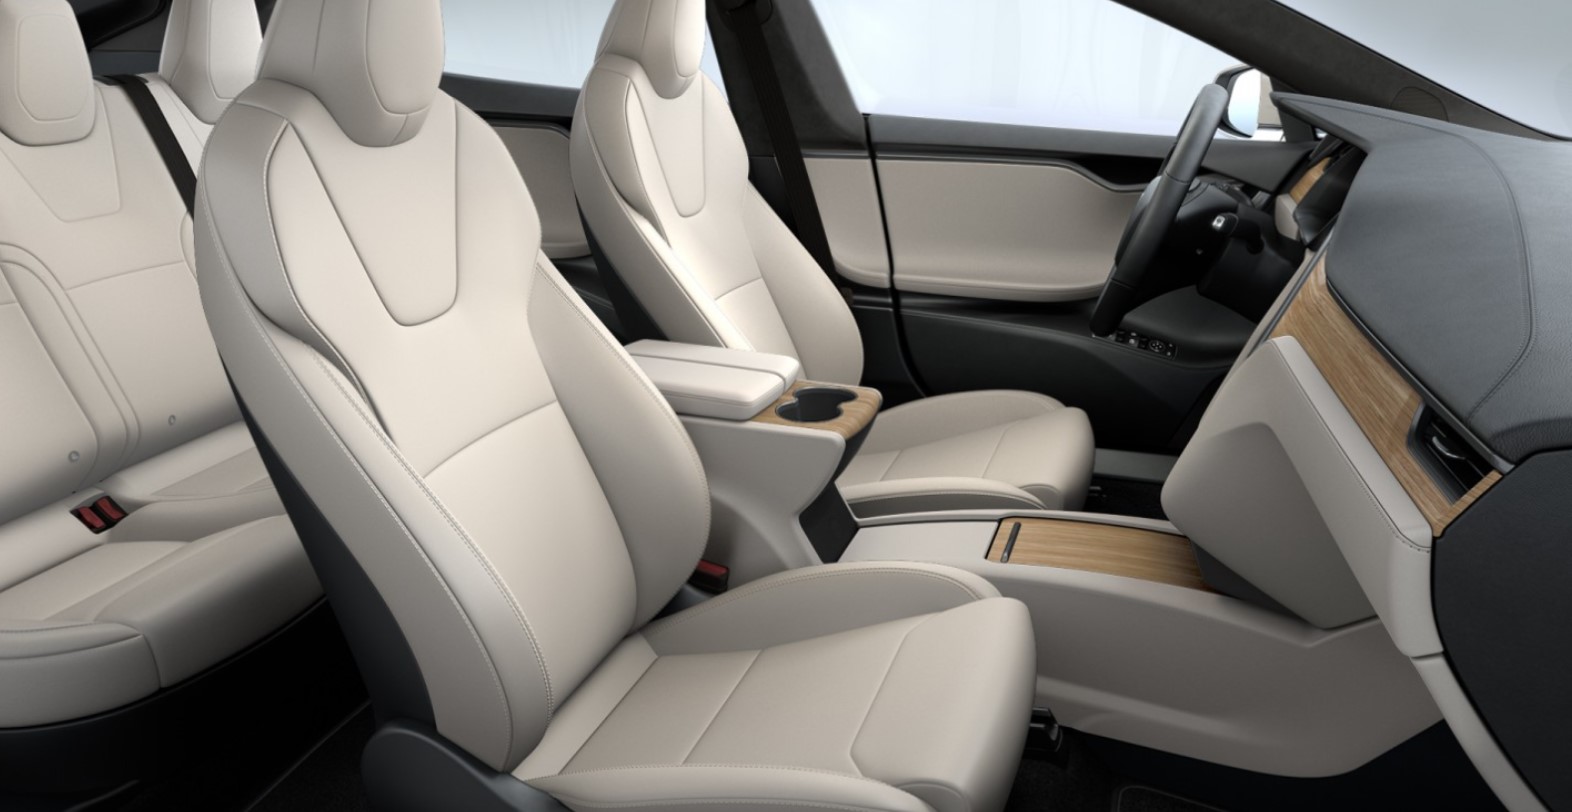 New Tesla Model 3 Seats Cover Replacement Cost